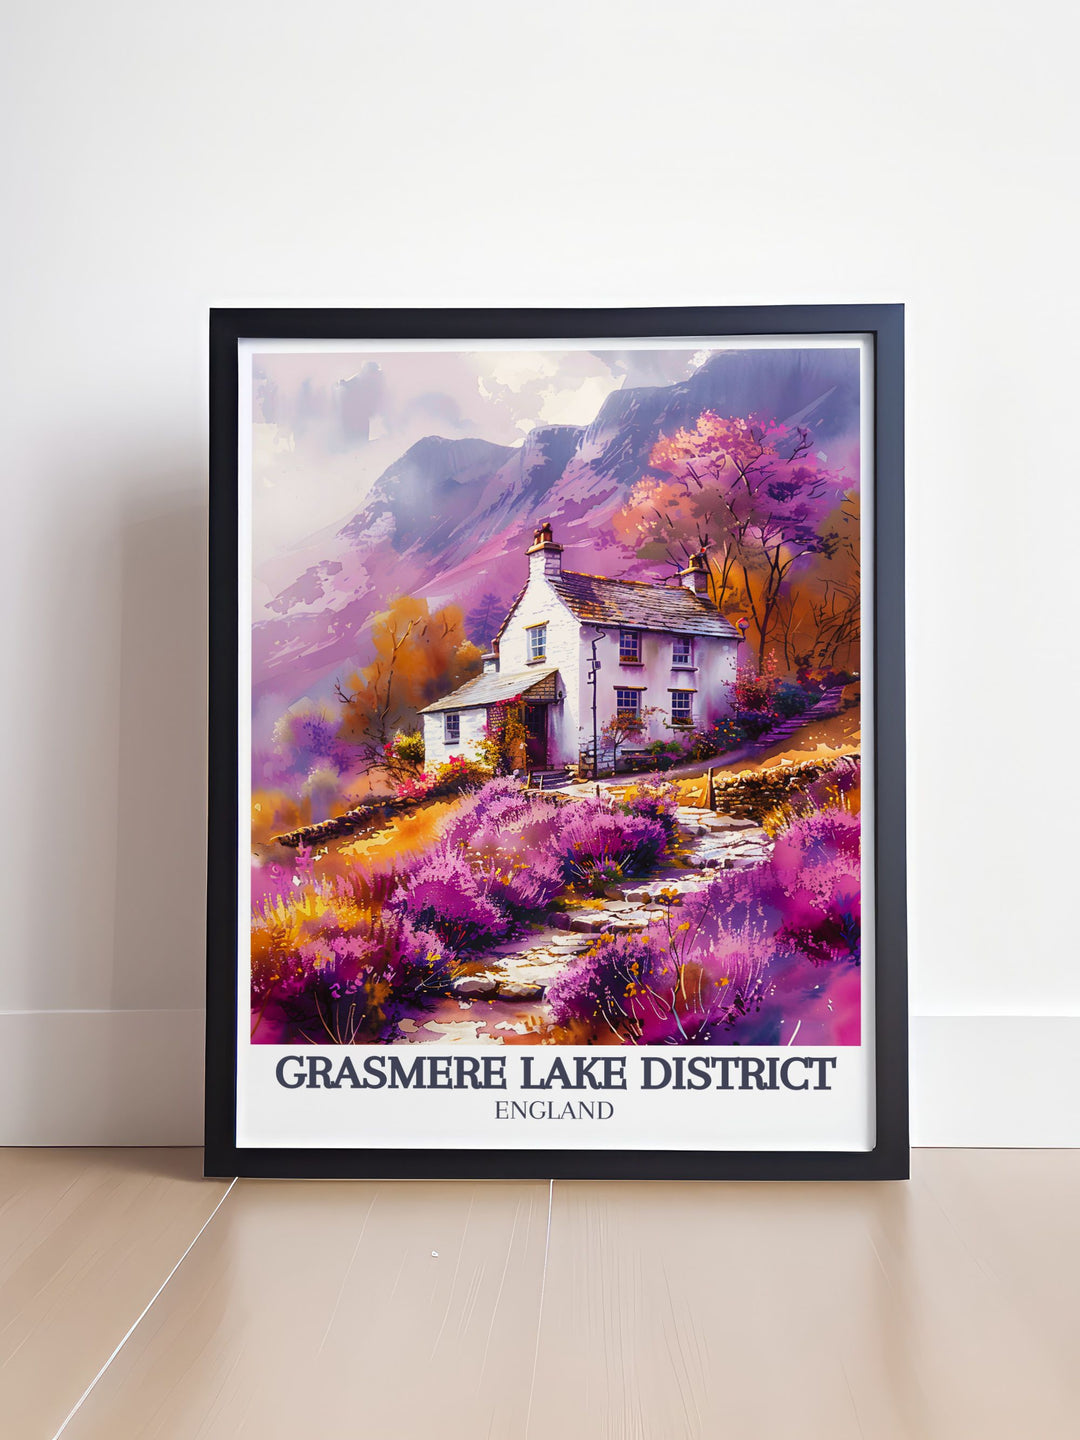 Highlighting the charm of Grasmere Village in the Lake District, this poster showcases historic stone cottages and vibrant gardens, perfect for bringing the timeless beauty of English villages into any space.